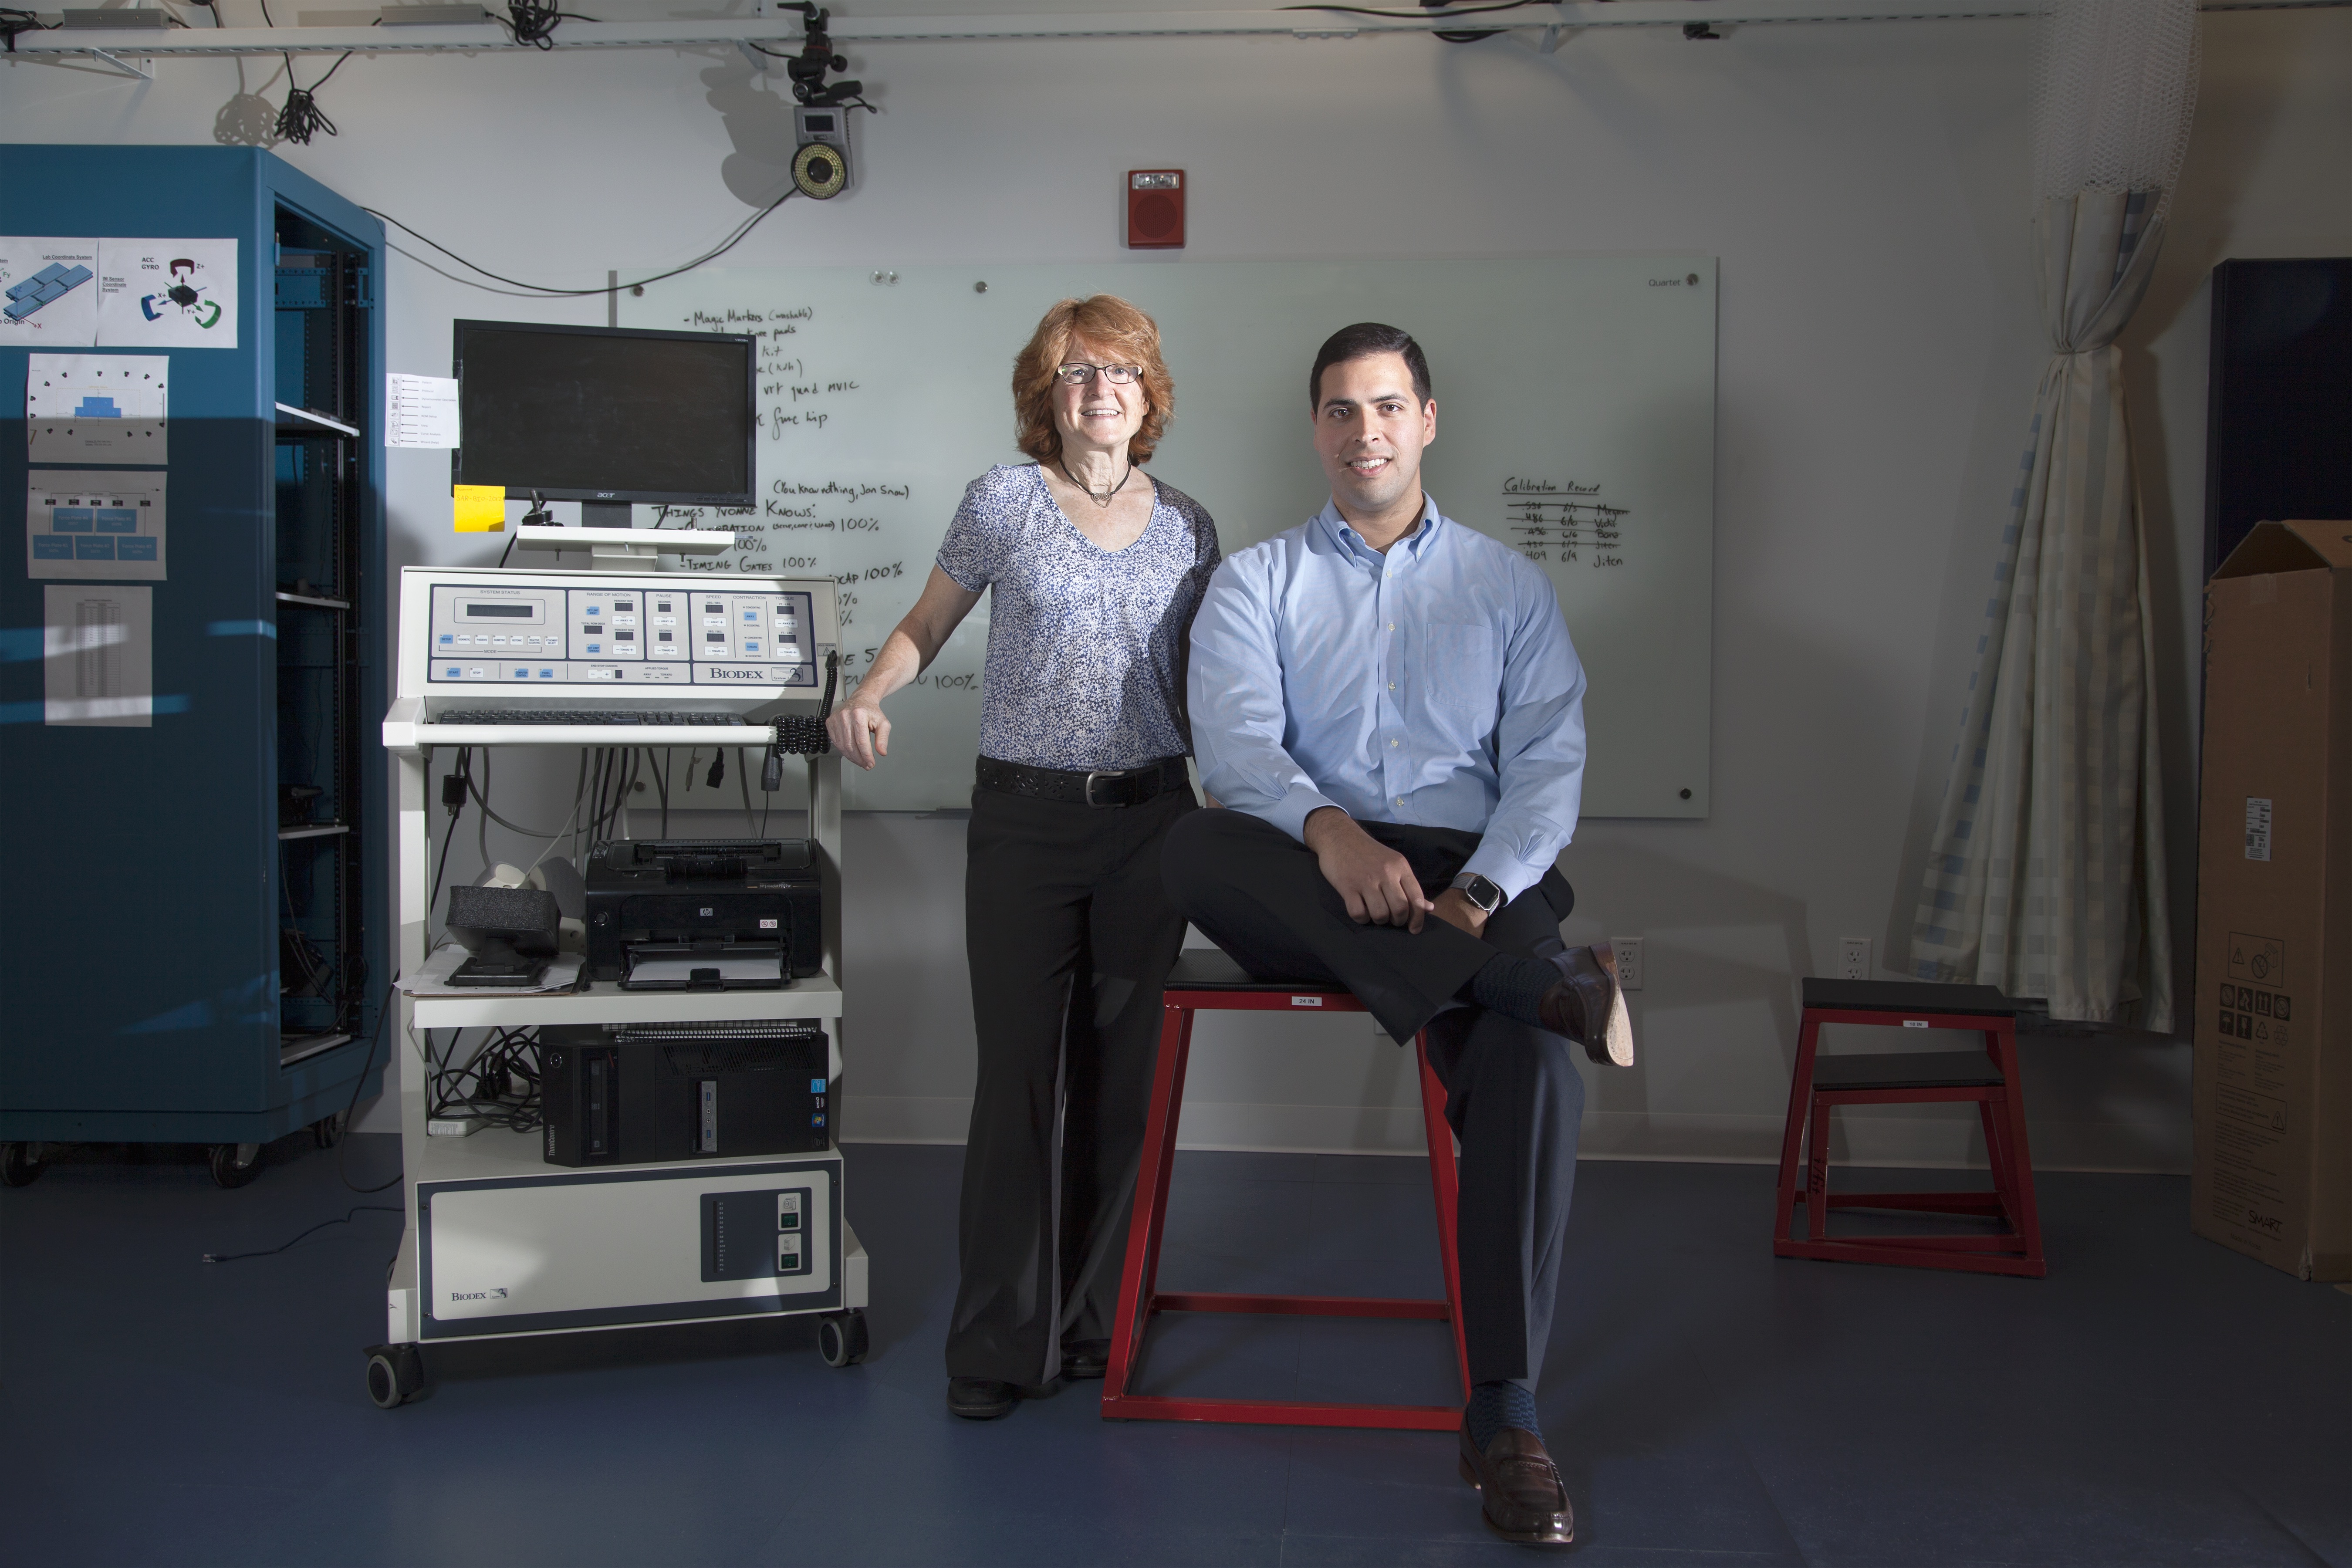 Sargent physical therapy professors Terry Ellis (left) and Lou Awad are developing the medical exosuit to help people relearn to walk after a stroke.